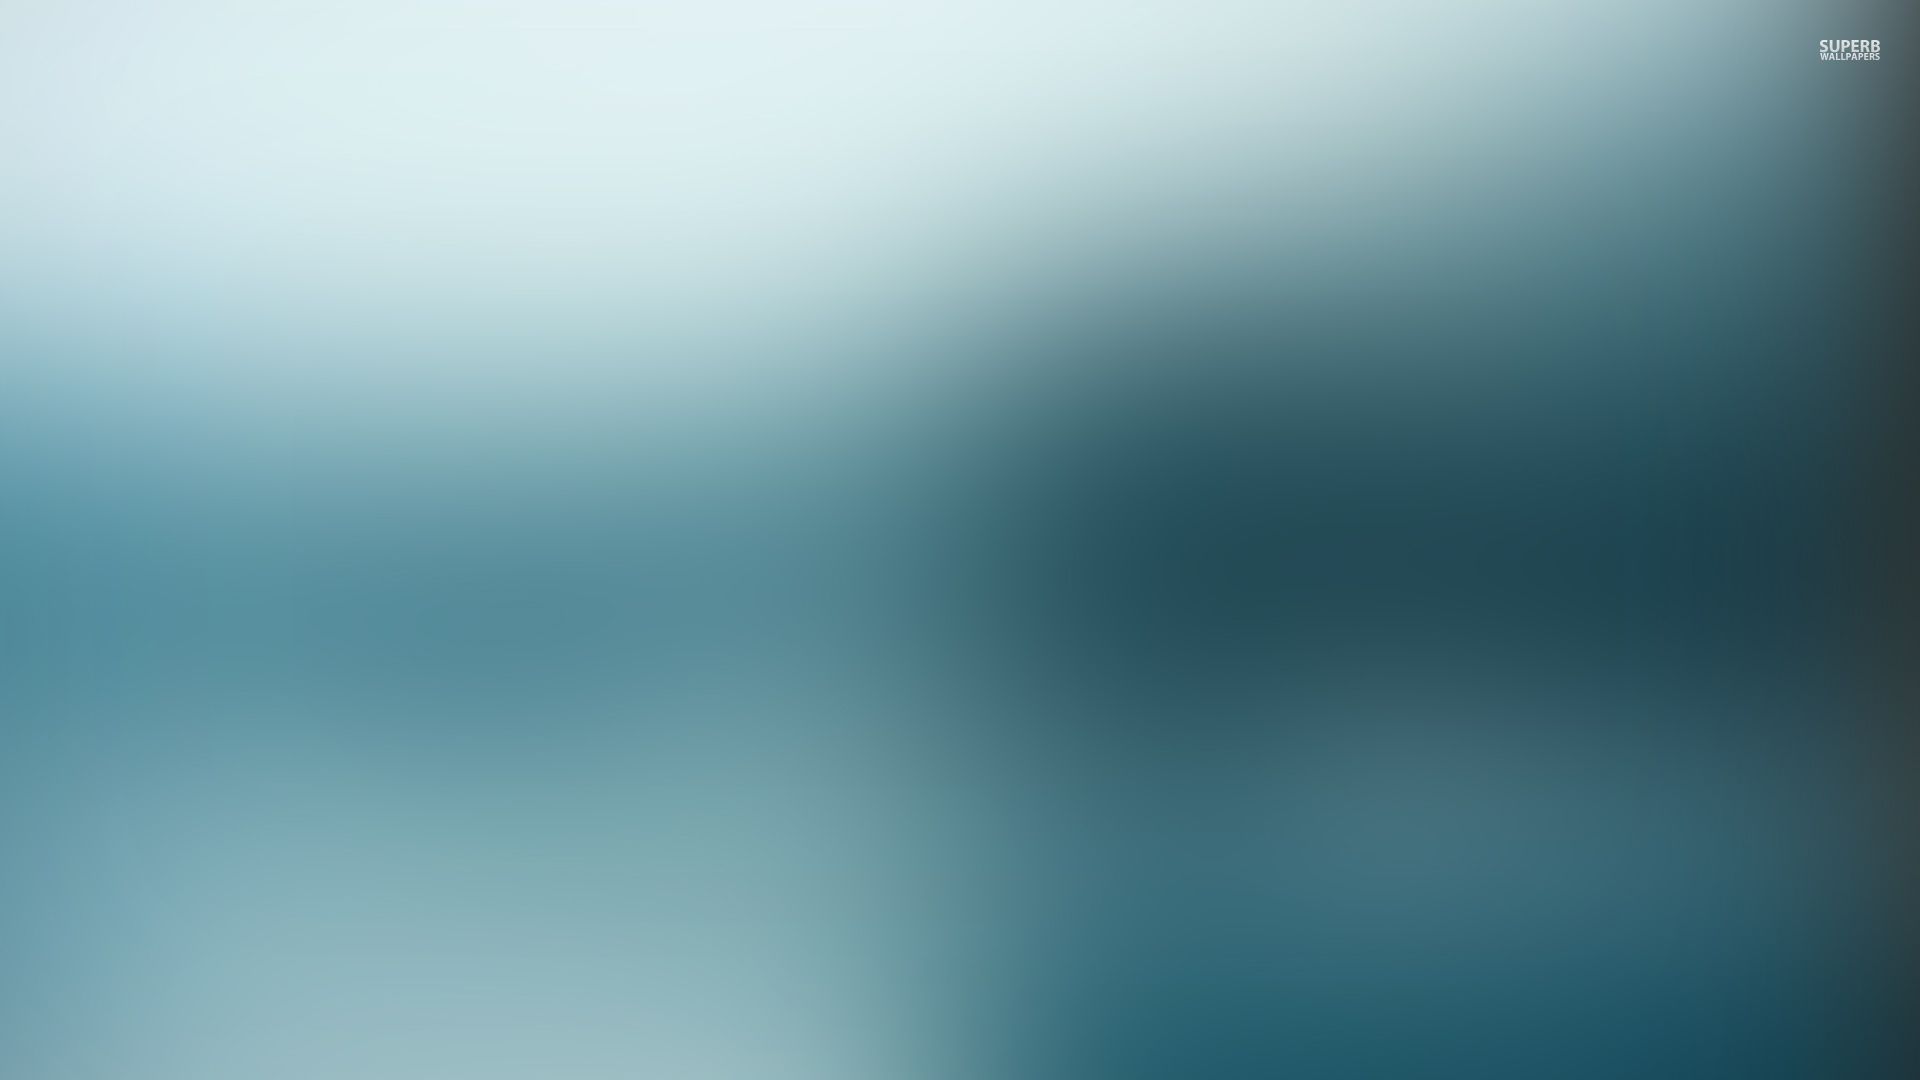 Hd Quality Images Of Blur - Blue Grey Background Blur - 1920x1080 Wallpaper  